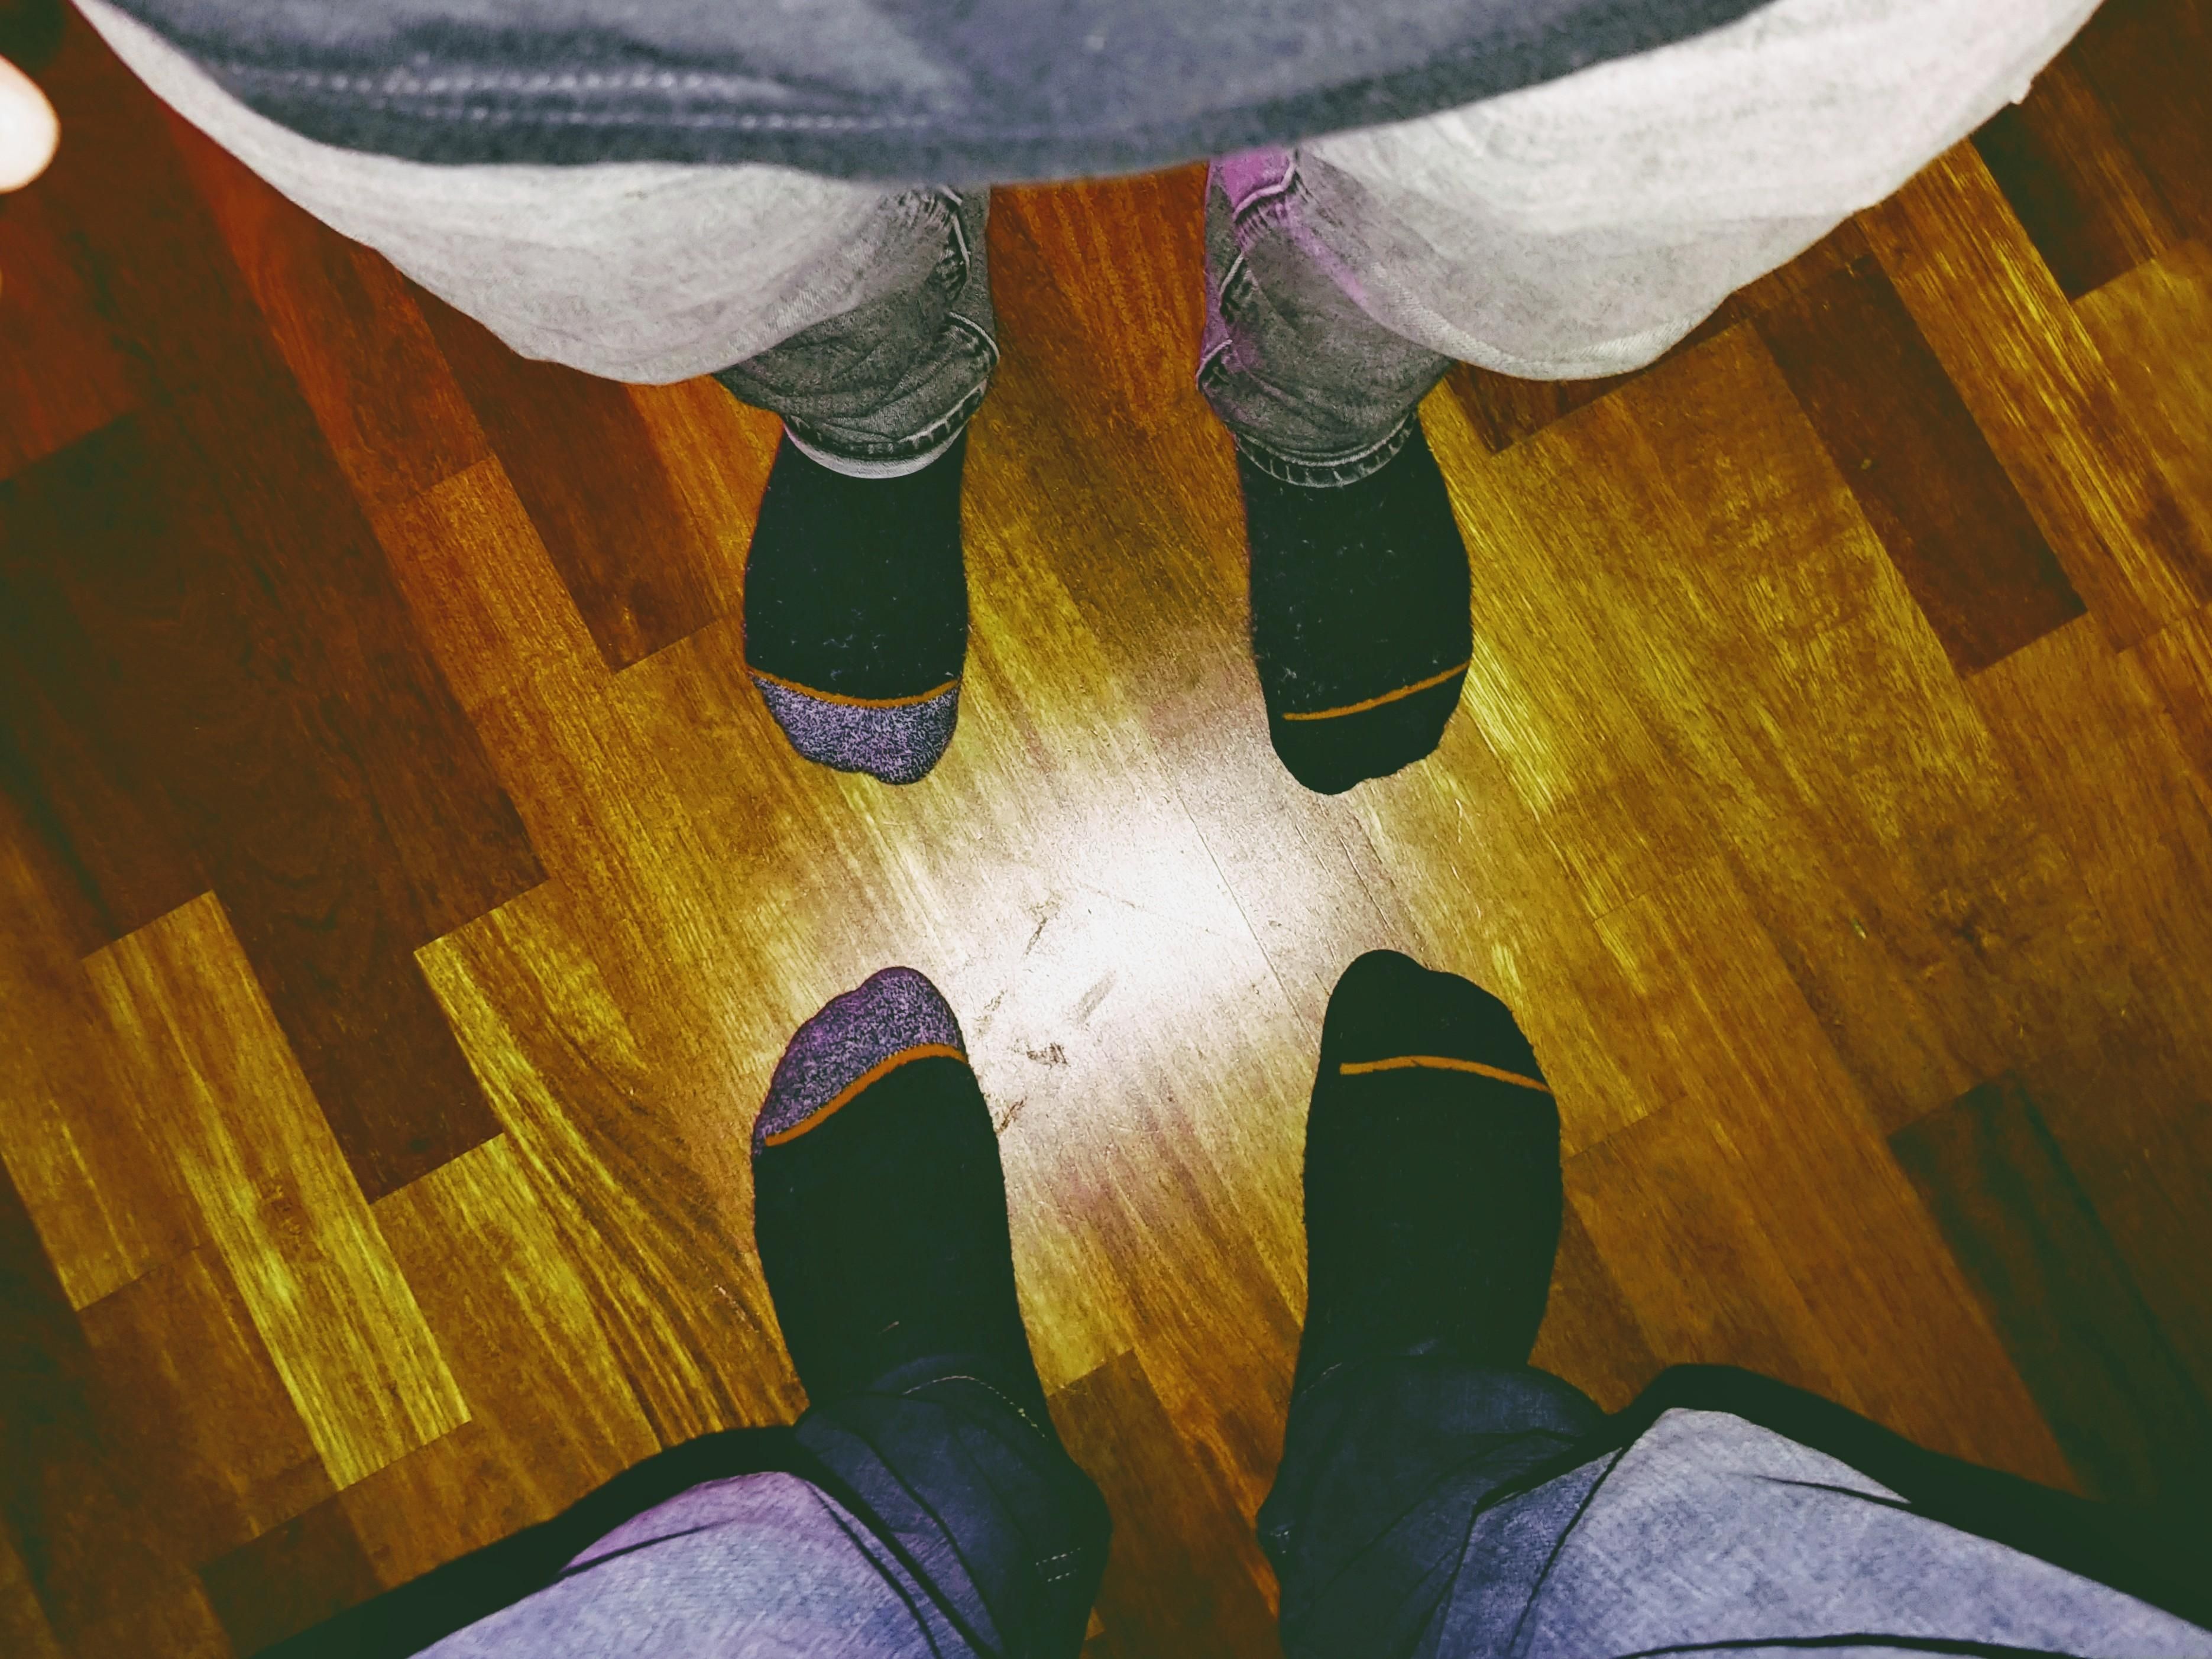 Me and a guy I met at a party wore the same mismatched socks